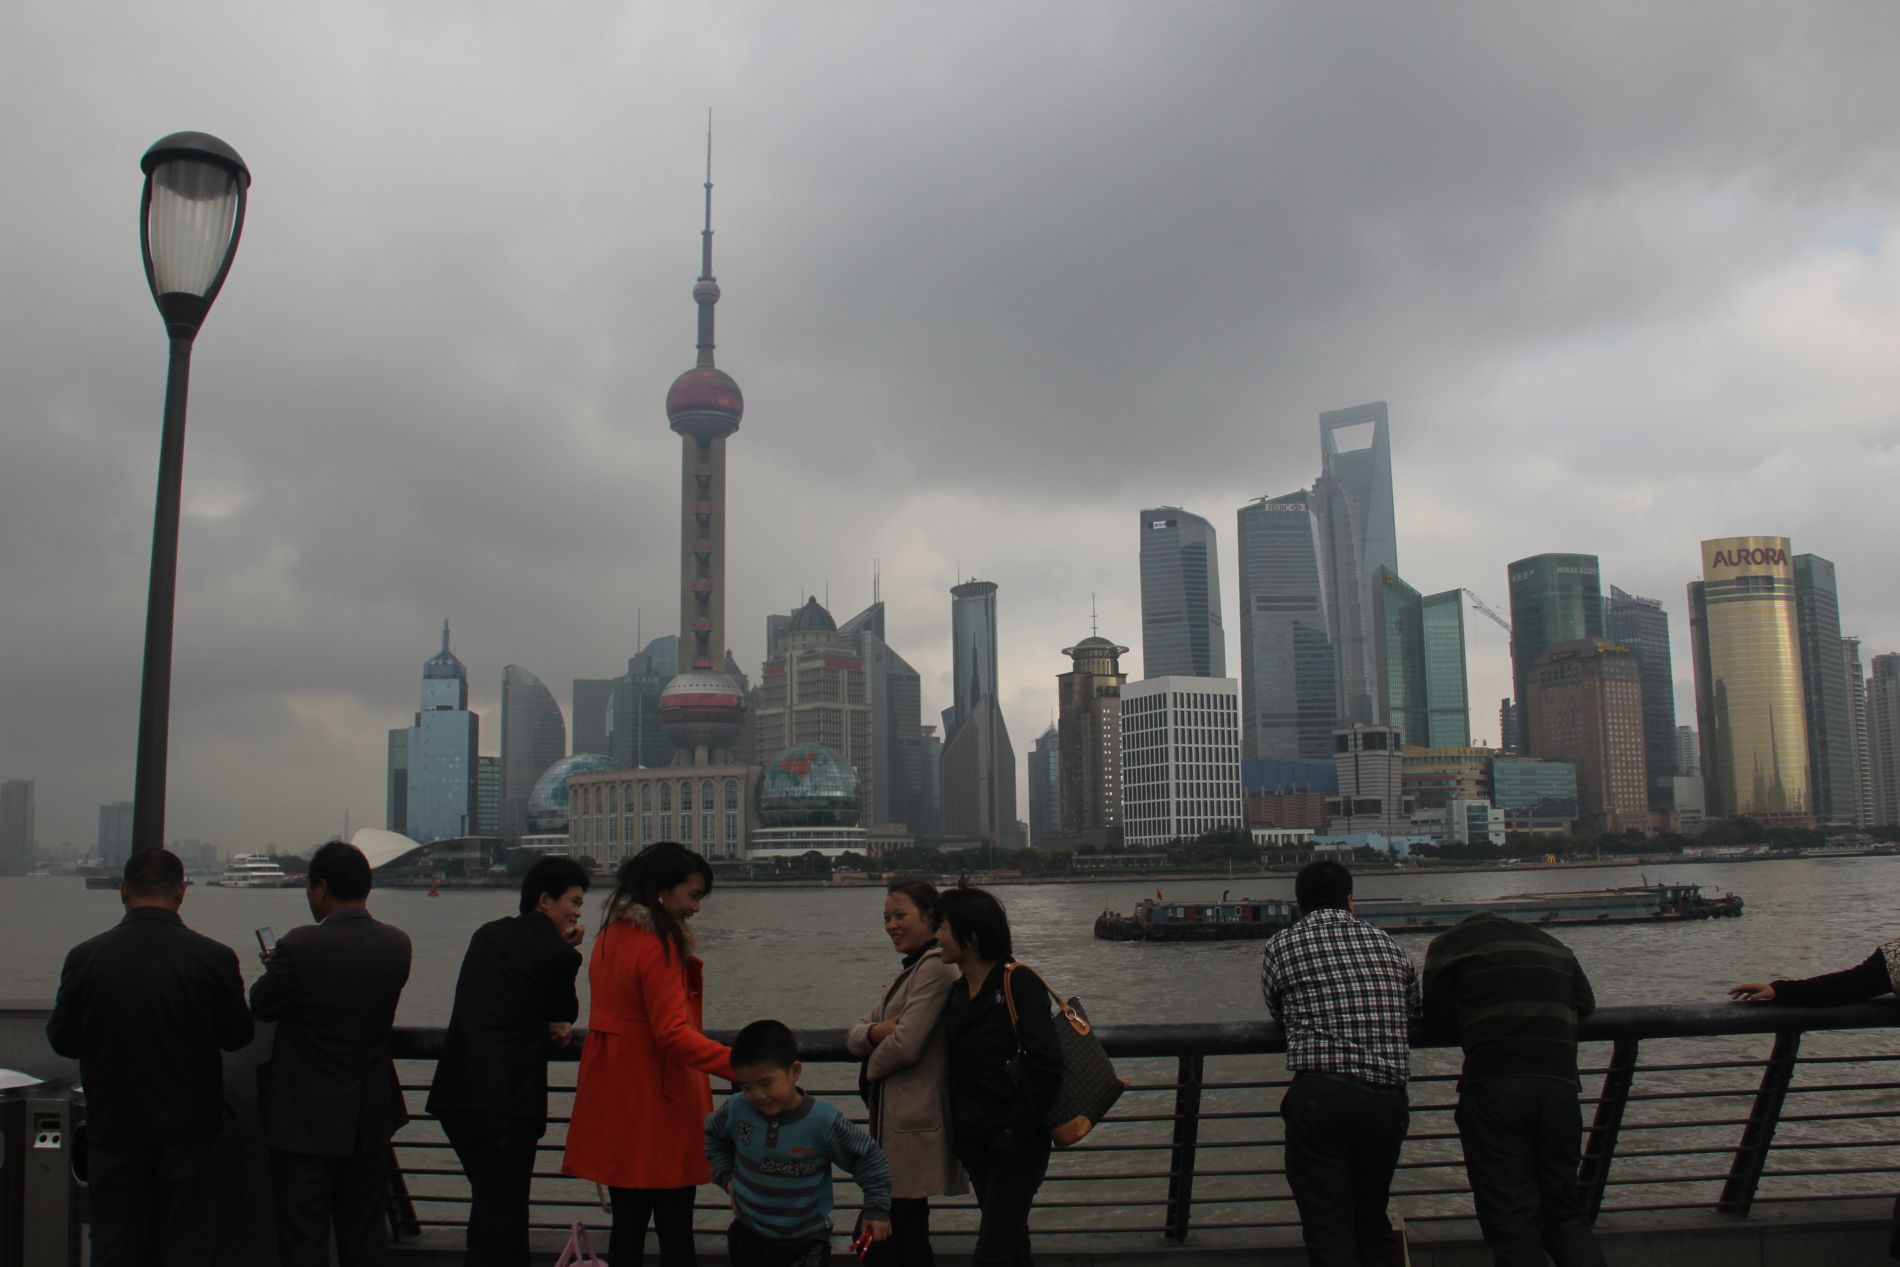 Shanghai's new Pudong neighborhod's skyline as seen from The Bund.